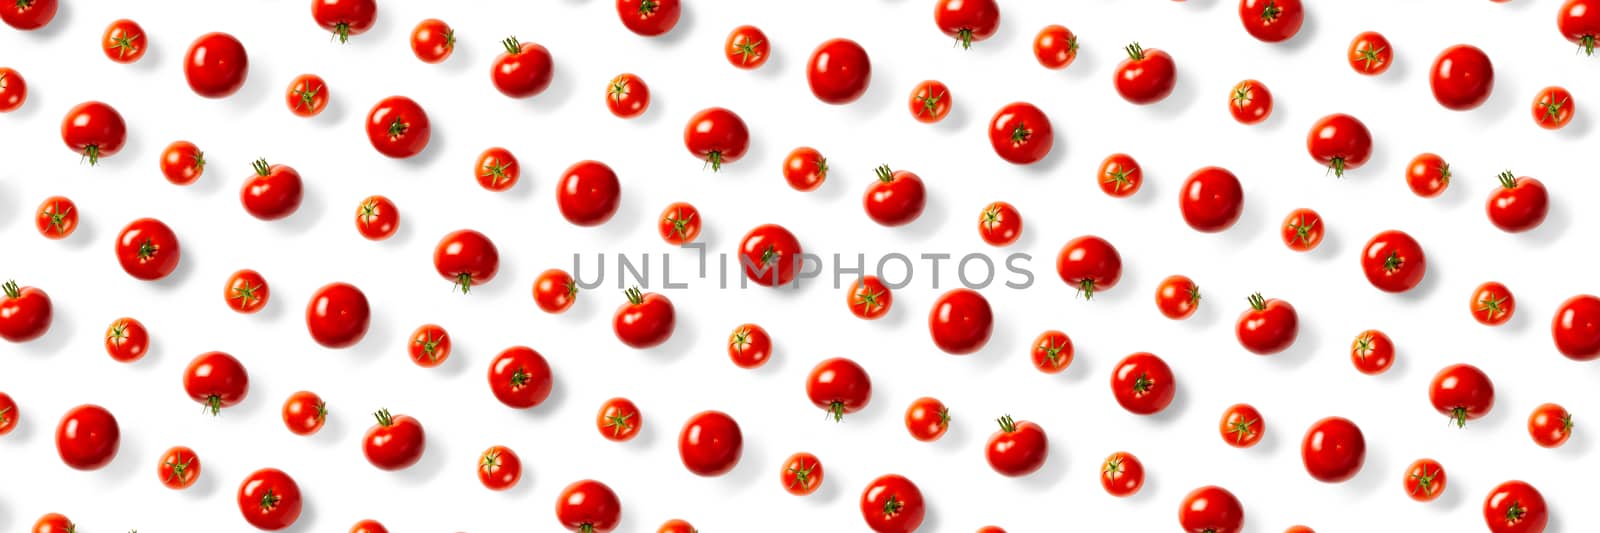 banner - creative background from red tomatoes. Abstract background. of isolated ripe Tomato on the white background not seamless pattern by PhotoTime